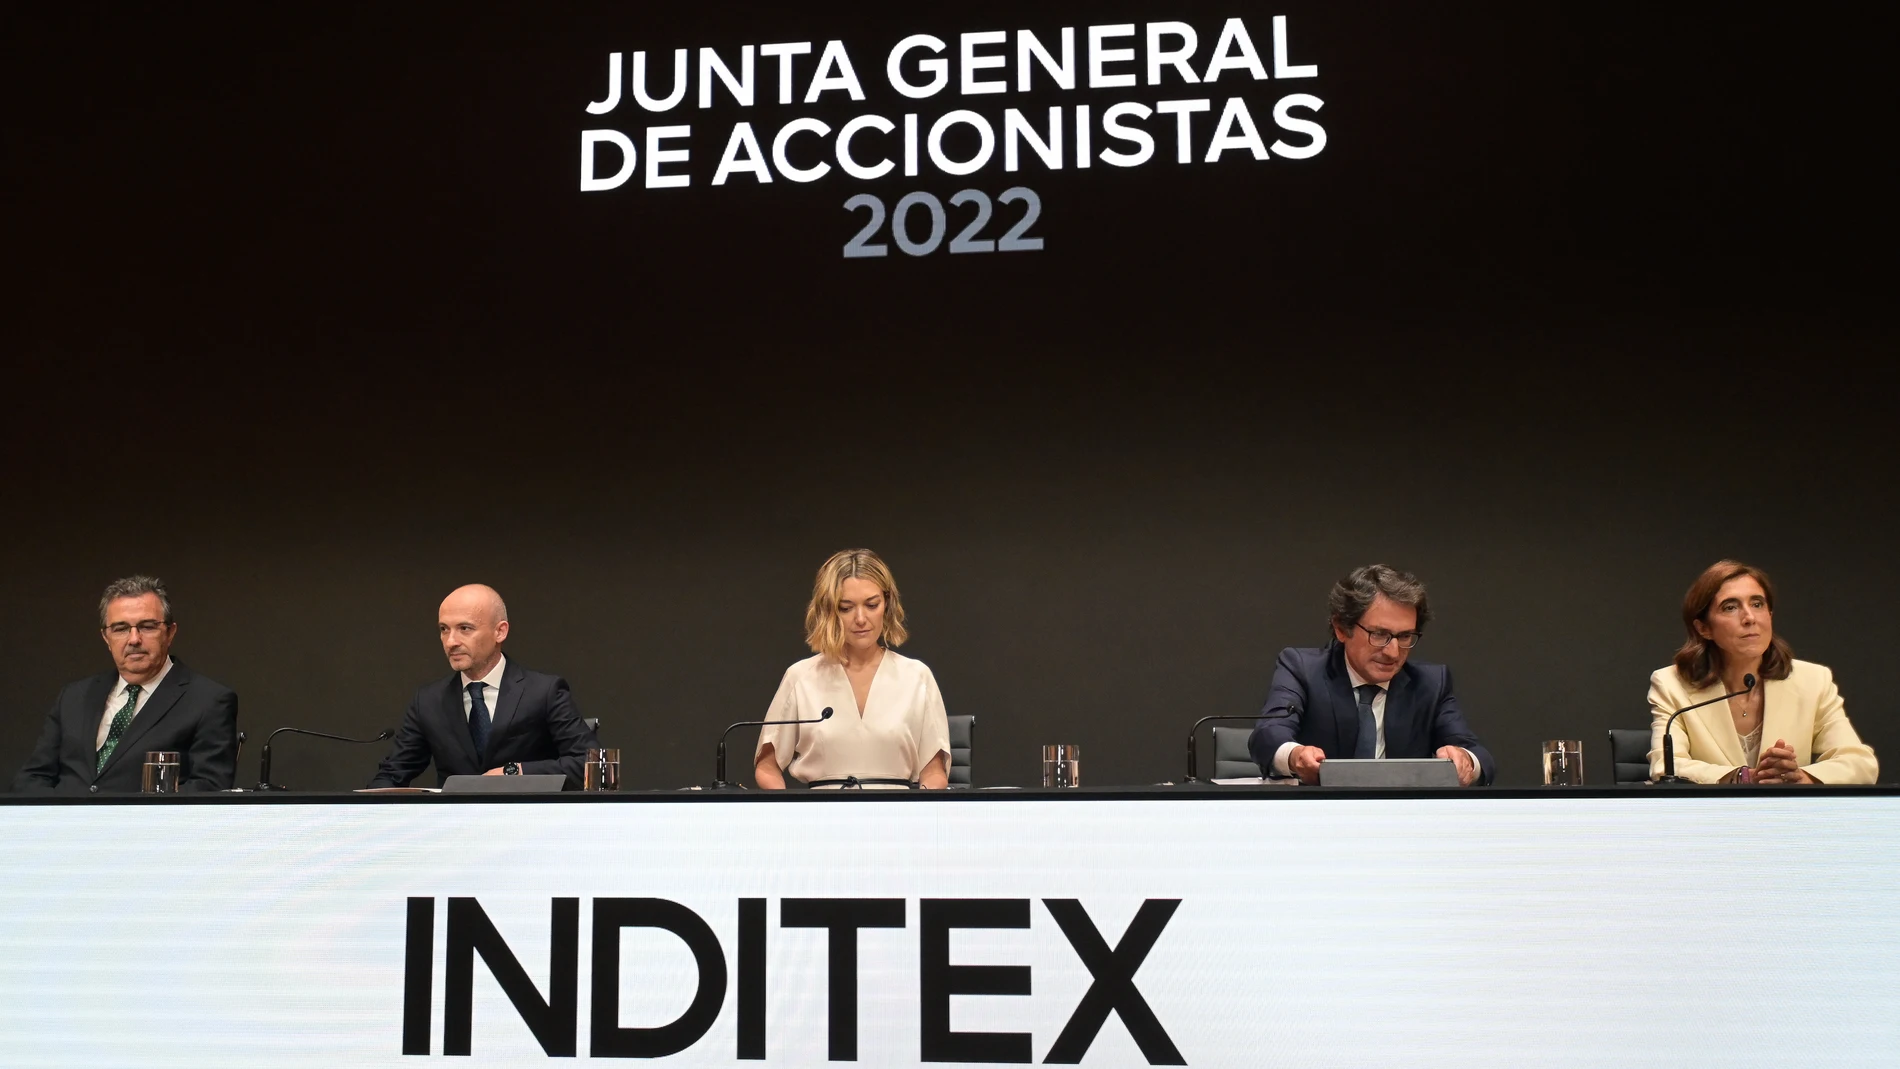 In the center, the CEO of Inditex, Óscar García Maceiras, and the Chairwoman of Inditex, Marta Ortega, together with the rest of the members of the Board of Directors during the first call of the General Shareholders' Meeting of Inditex, at the corporate headquarters of the company, on July 12, 2022, in Arteixo, A Coruña, Galicia (Spain). This will be the first general shareholders' meeting with Marta Ortega, daughter of the company's founder, Amancio Ortega, at the head of the textile multinational. The board of directors of Inditex will submit to the meeting the ratification and appointment of Marta Ortega Pérez as member of the management body of the company, with the qualification of proprietary director, and of Óscar García Maceiras, with the qualification of executive director, as well as the modification of the remuneration policy. The agenda also includes the appointment of EY as auditor of the company's accounts for the next three fiscal years, replacing Deloitte. 12 JULY